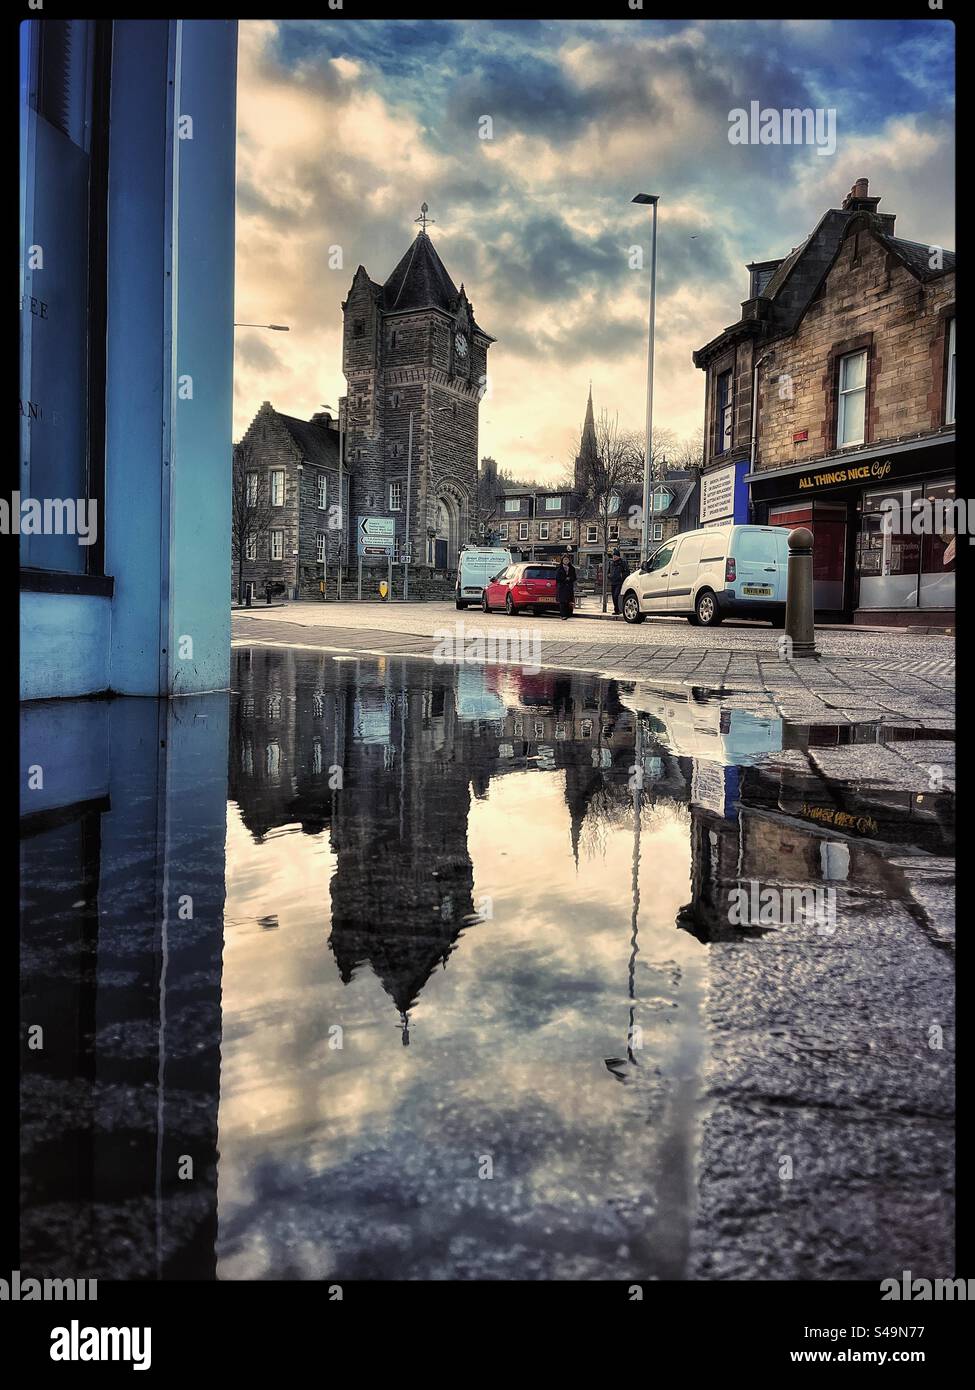 Galashiels council buildings, war memorial and clock with it reflected in a puddle. Stock Photo